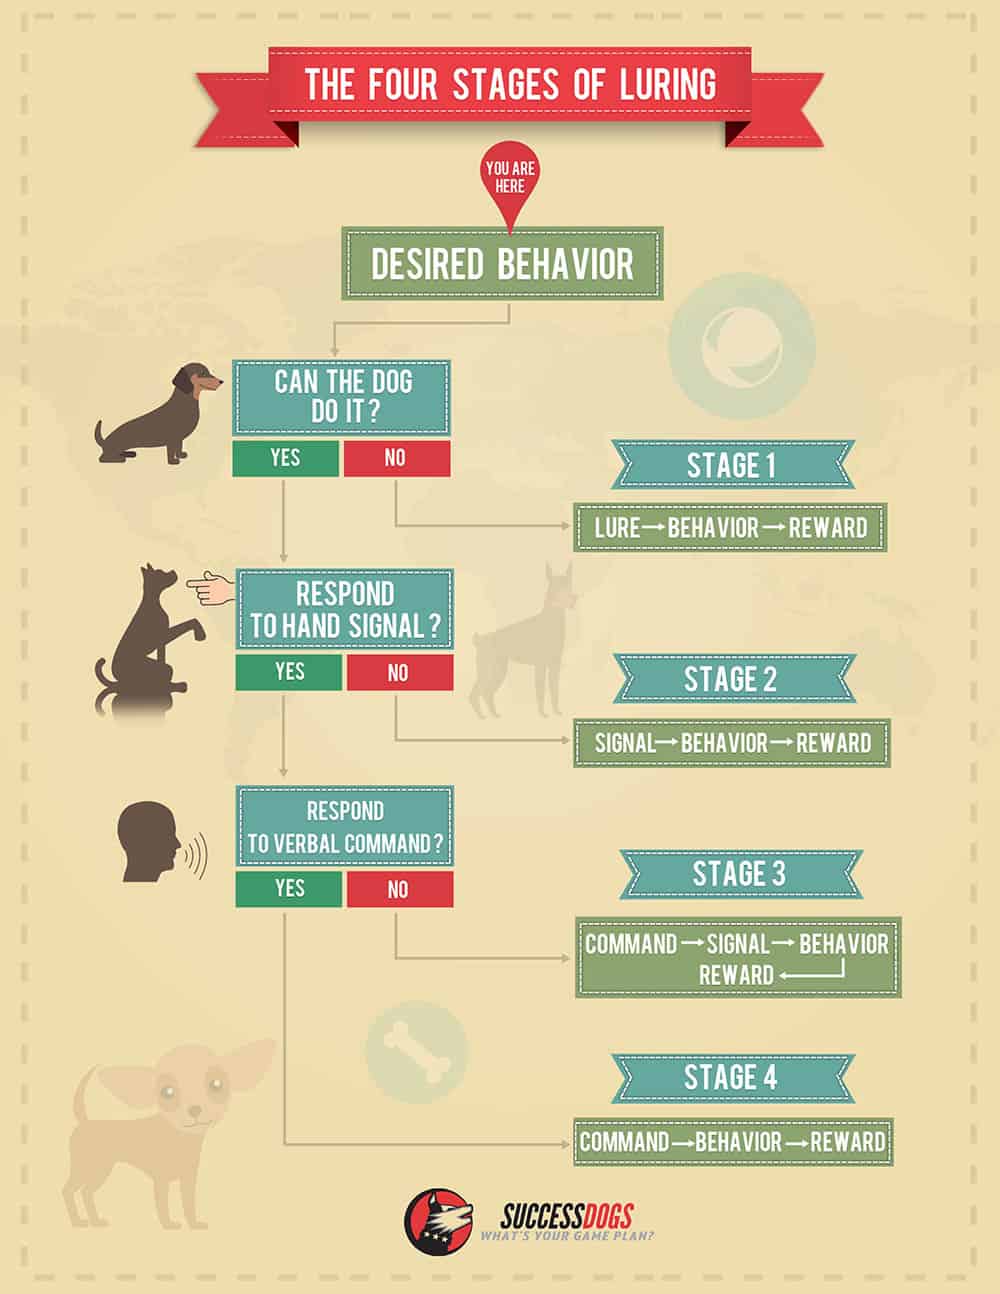 Dog Training Infographic - The Four Stages of Luring